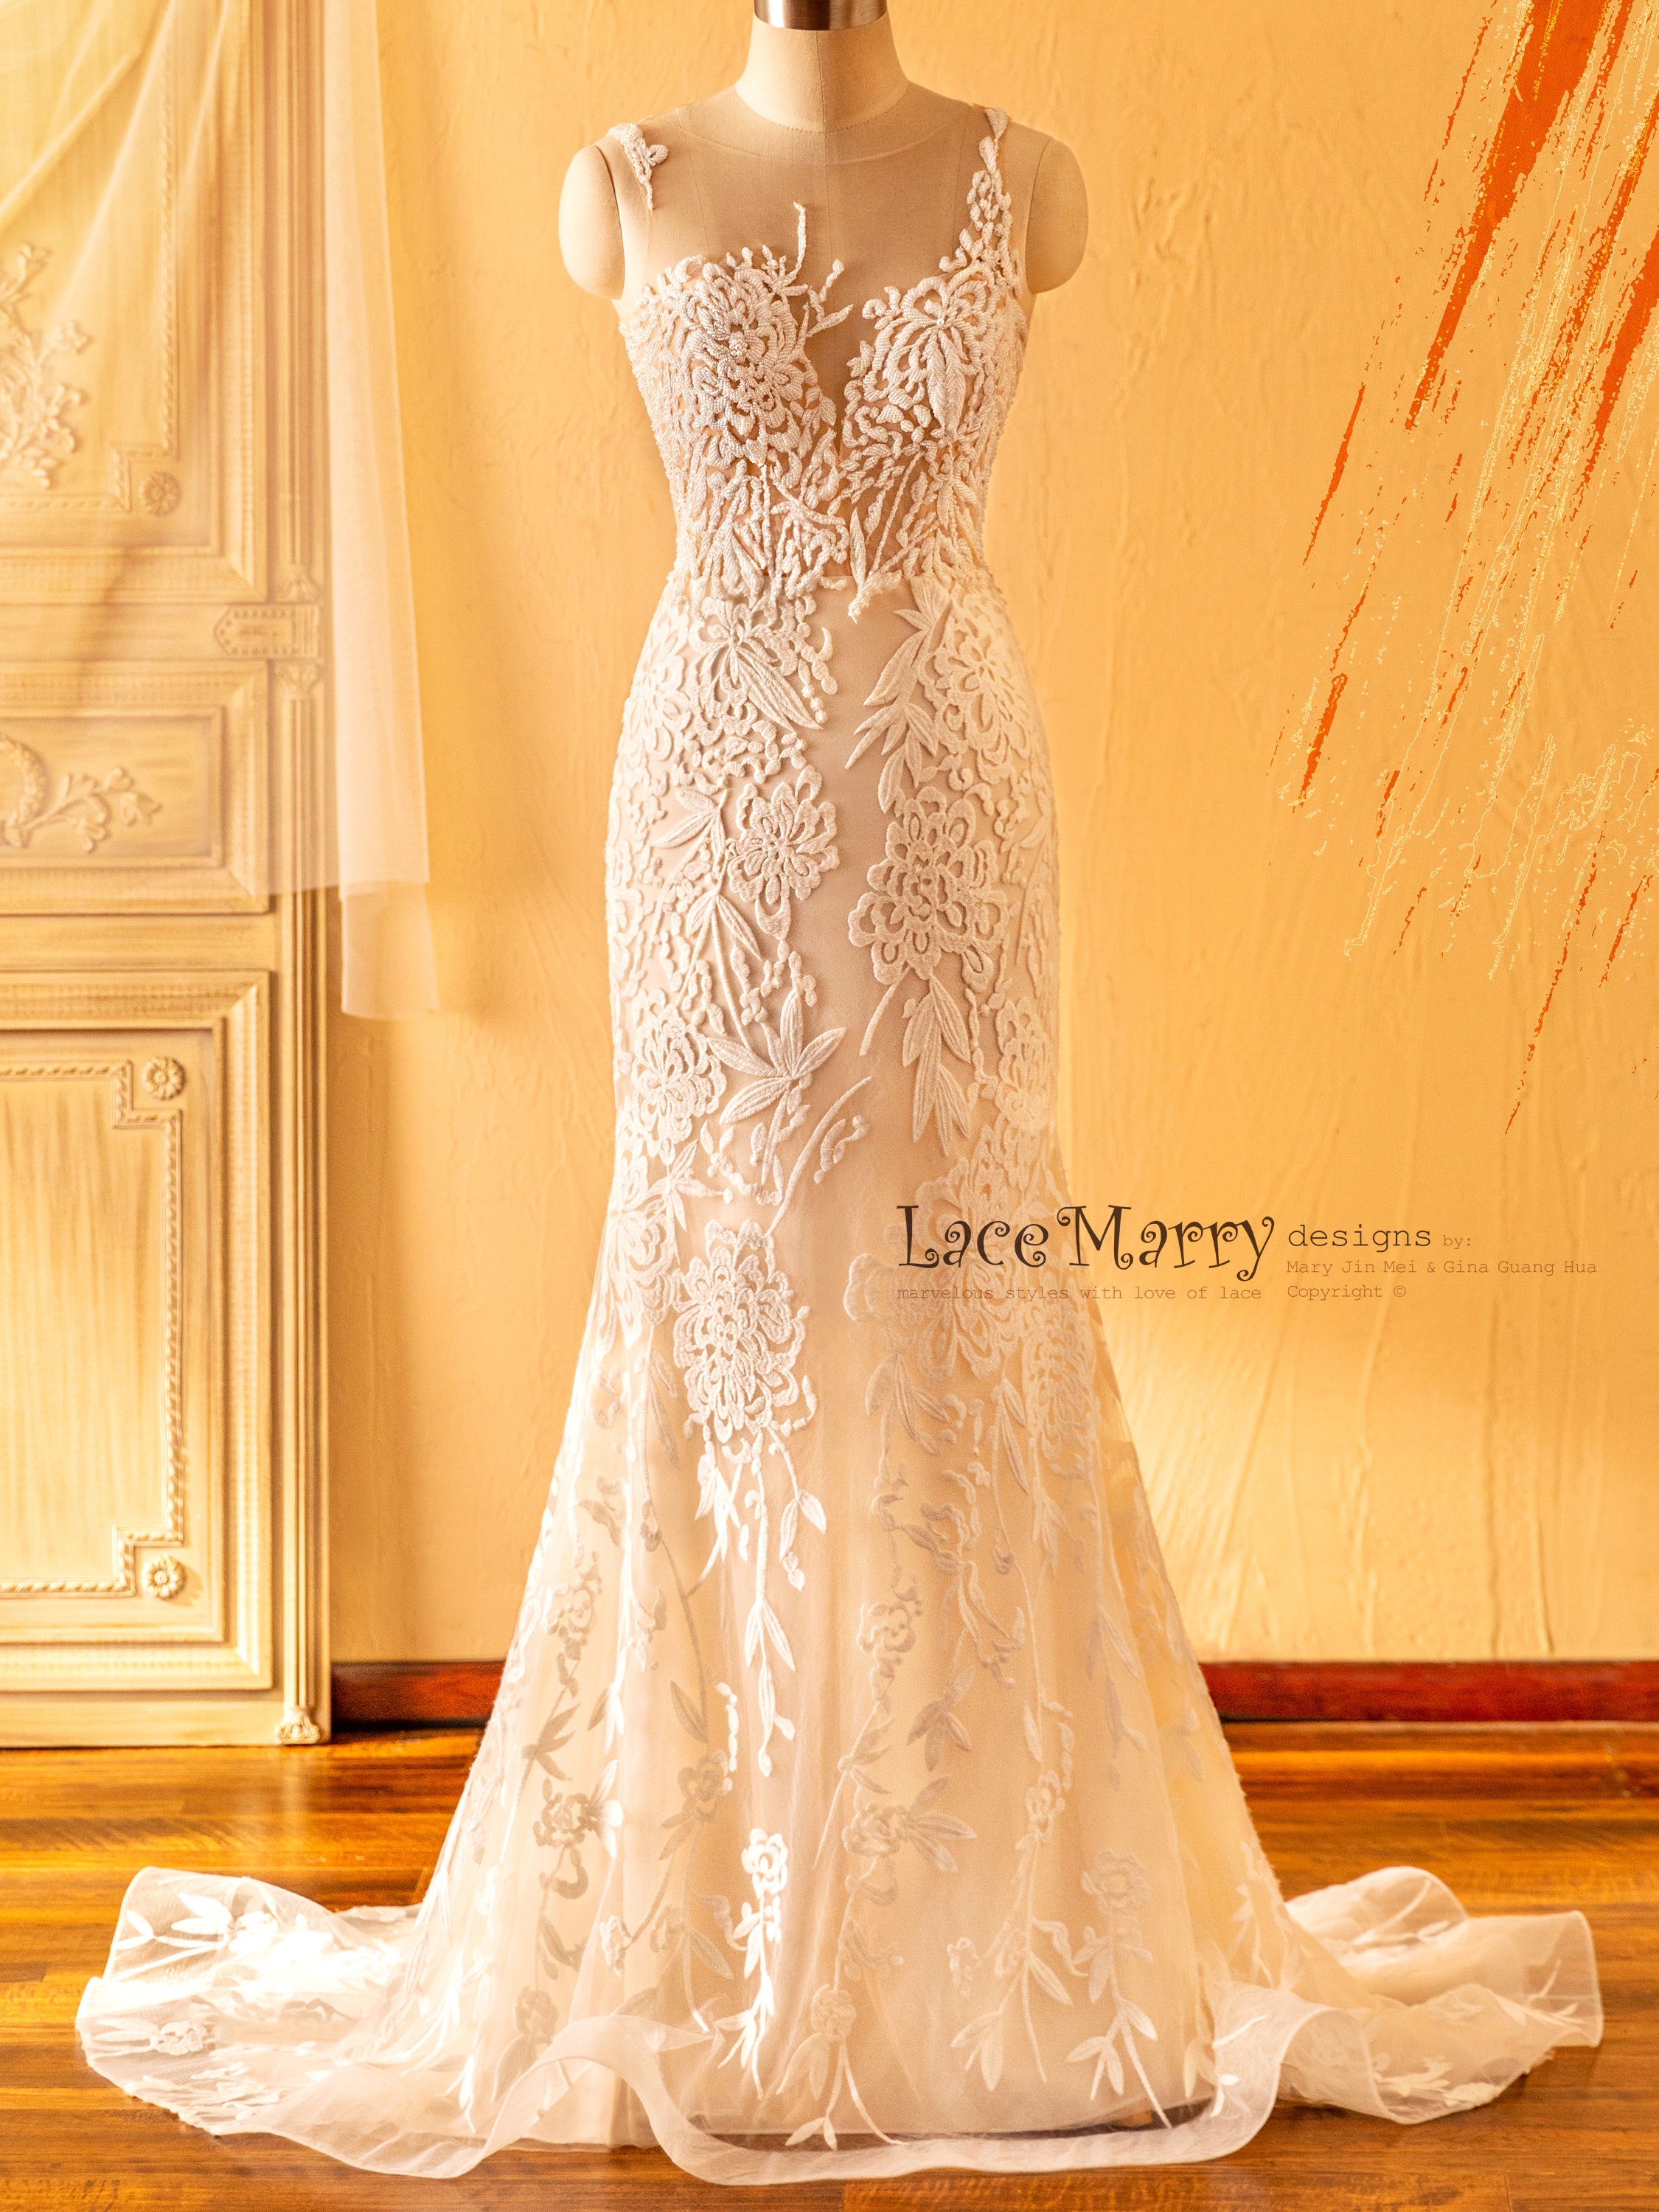 Strapless Mermaid Wedding Gown with Gold Lace